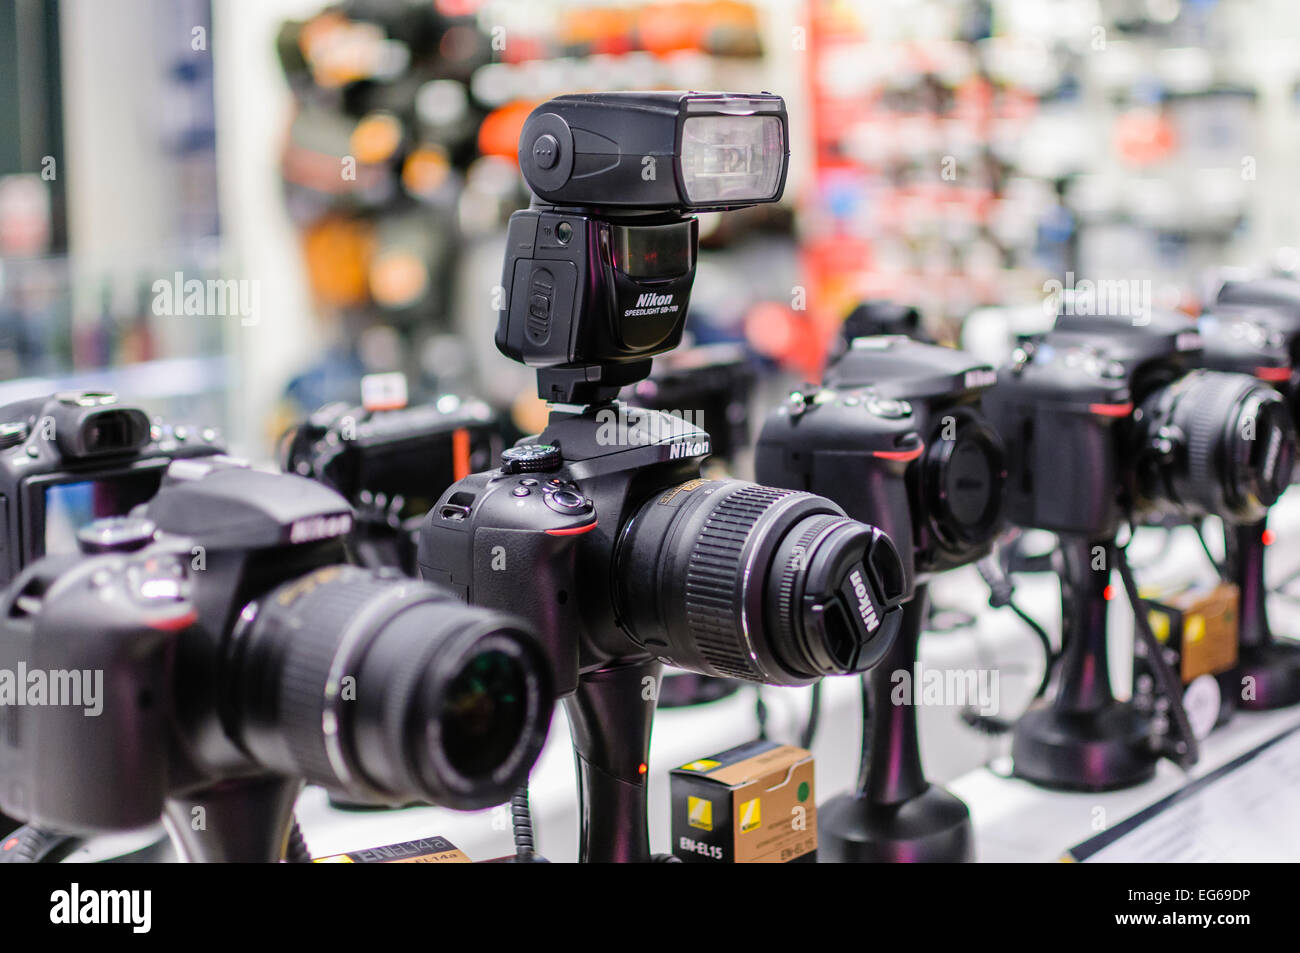 Cameras for sale in an electronics shop in an airport Stock Photo